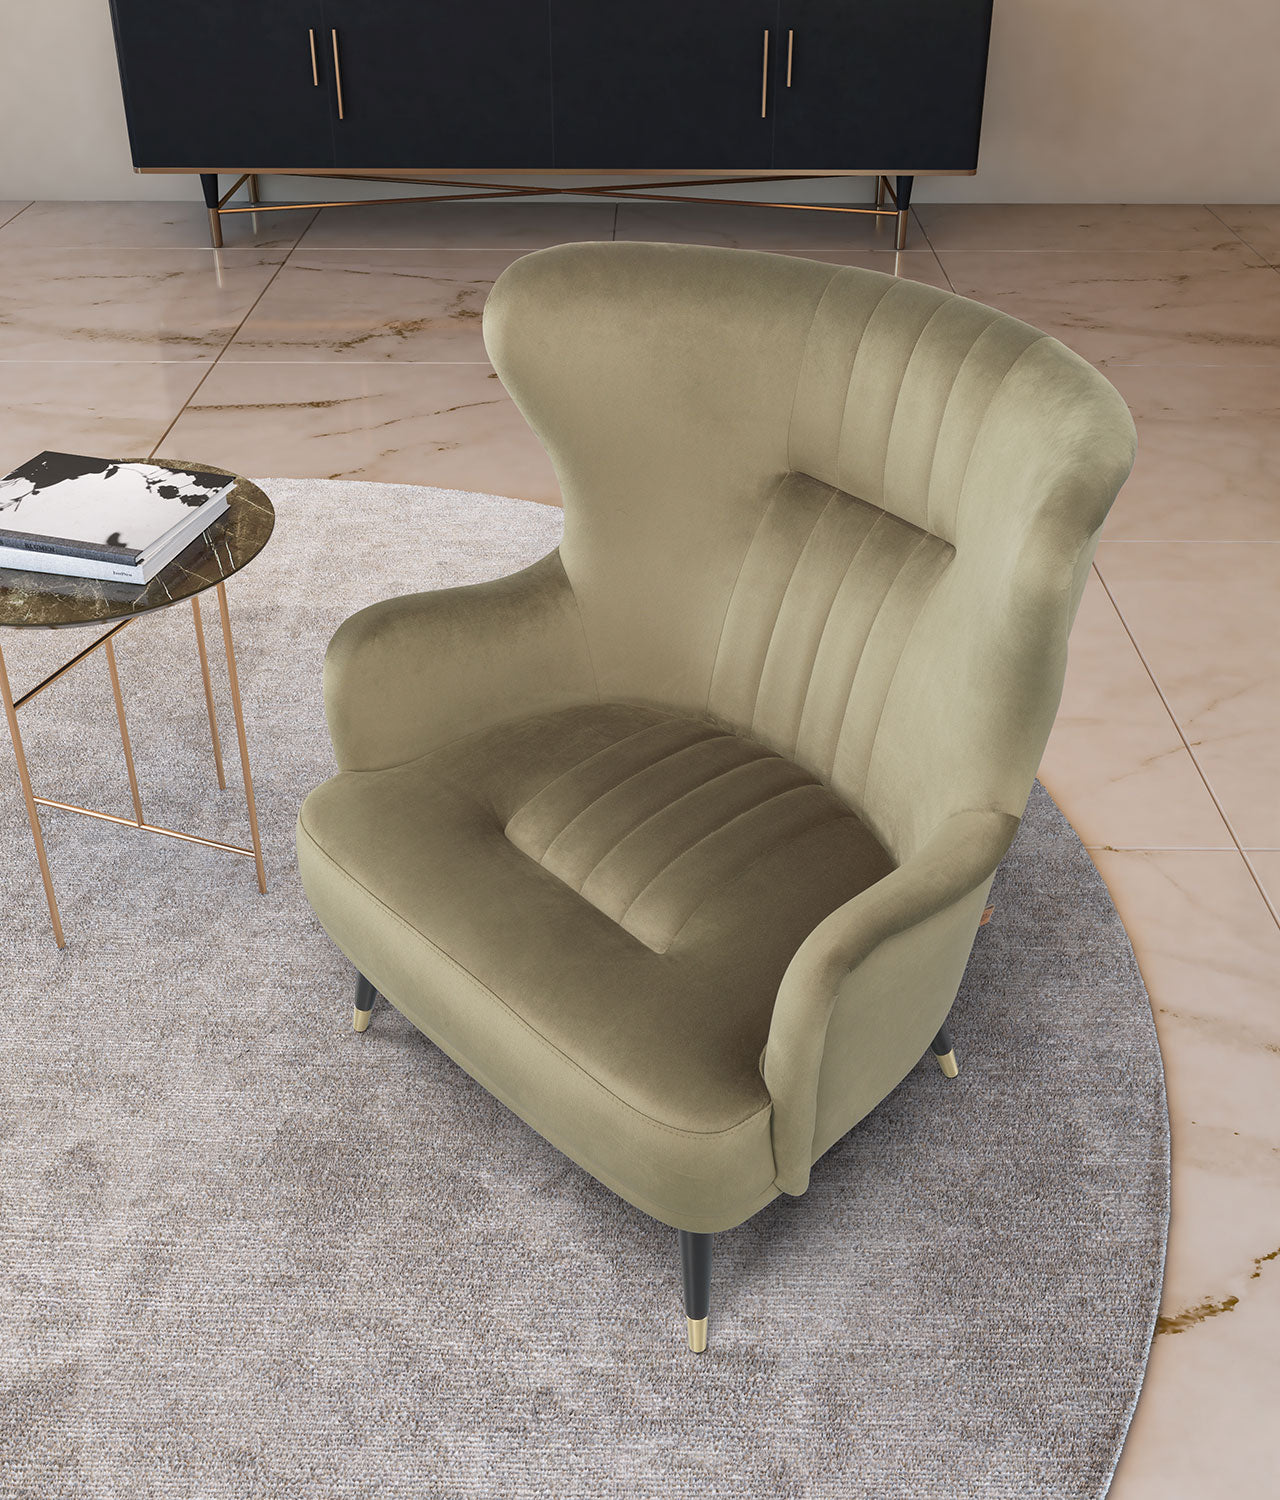 Olive upholstered armchair with retro style